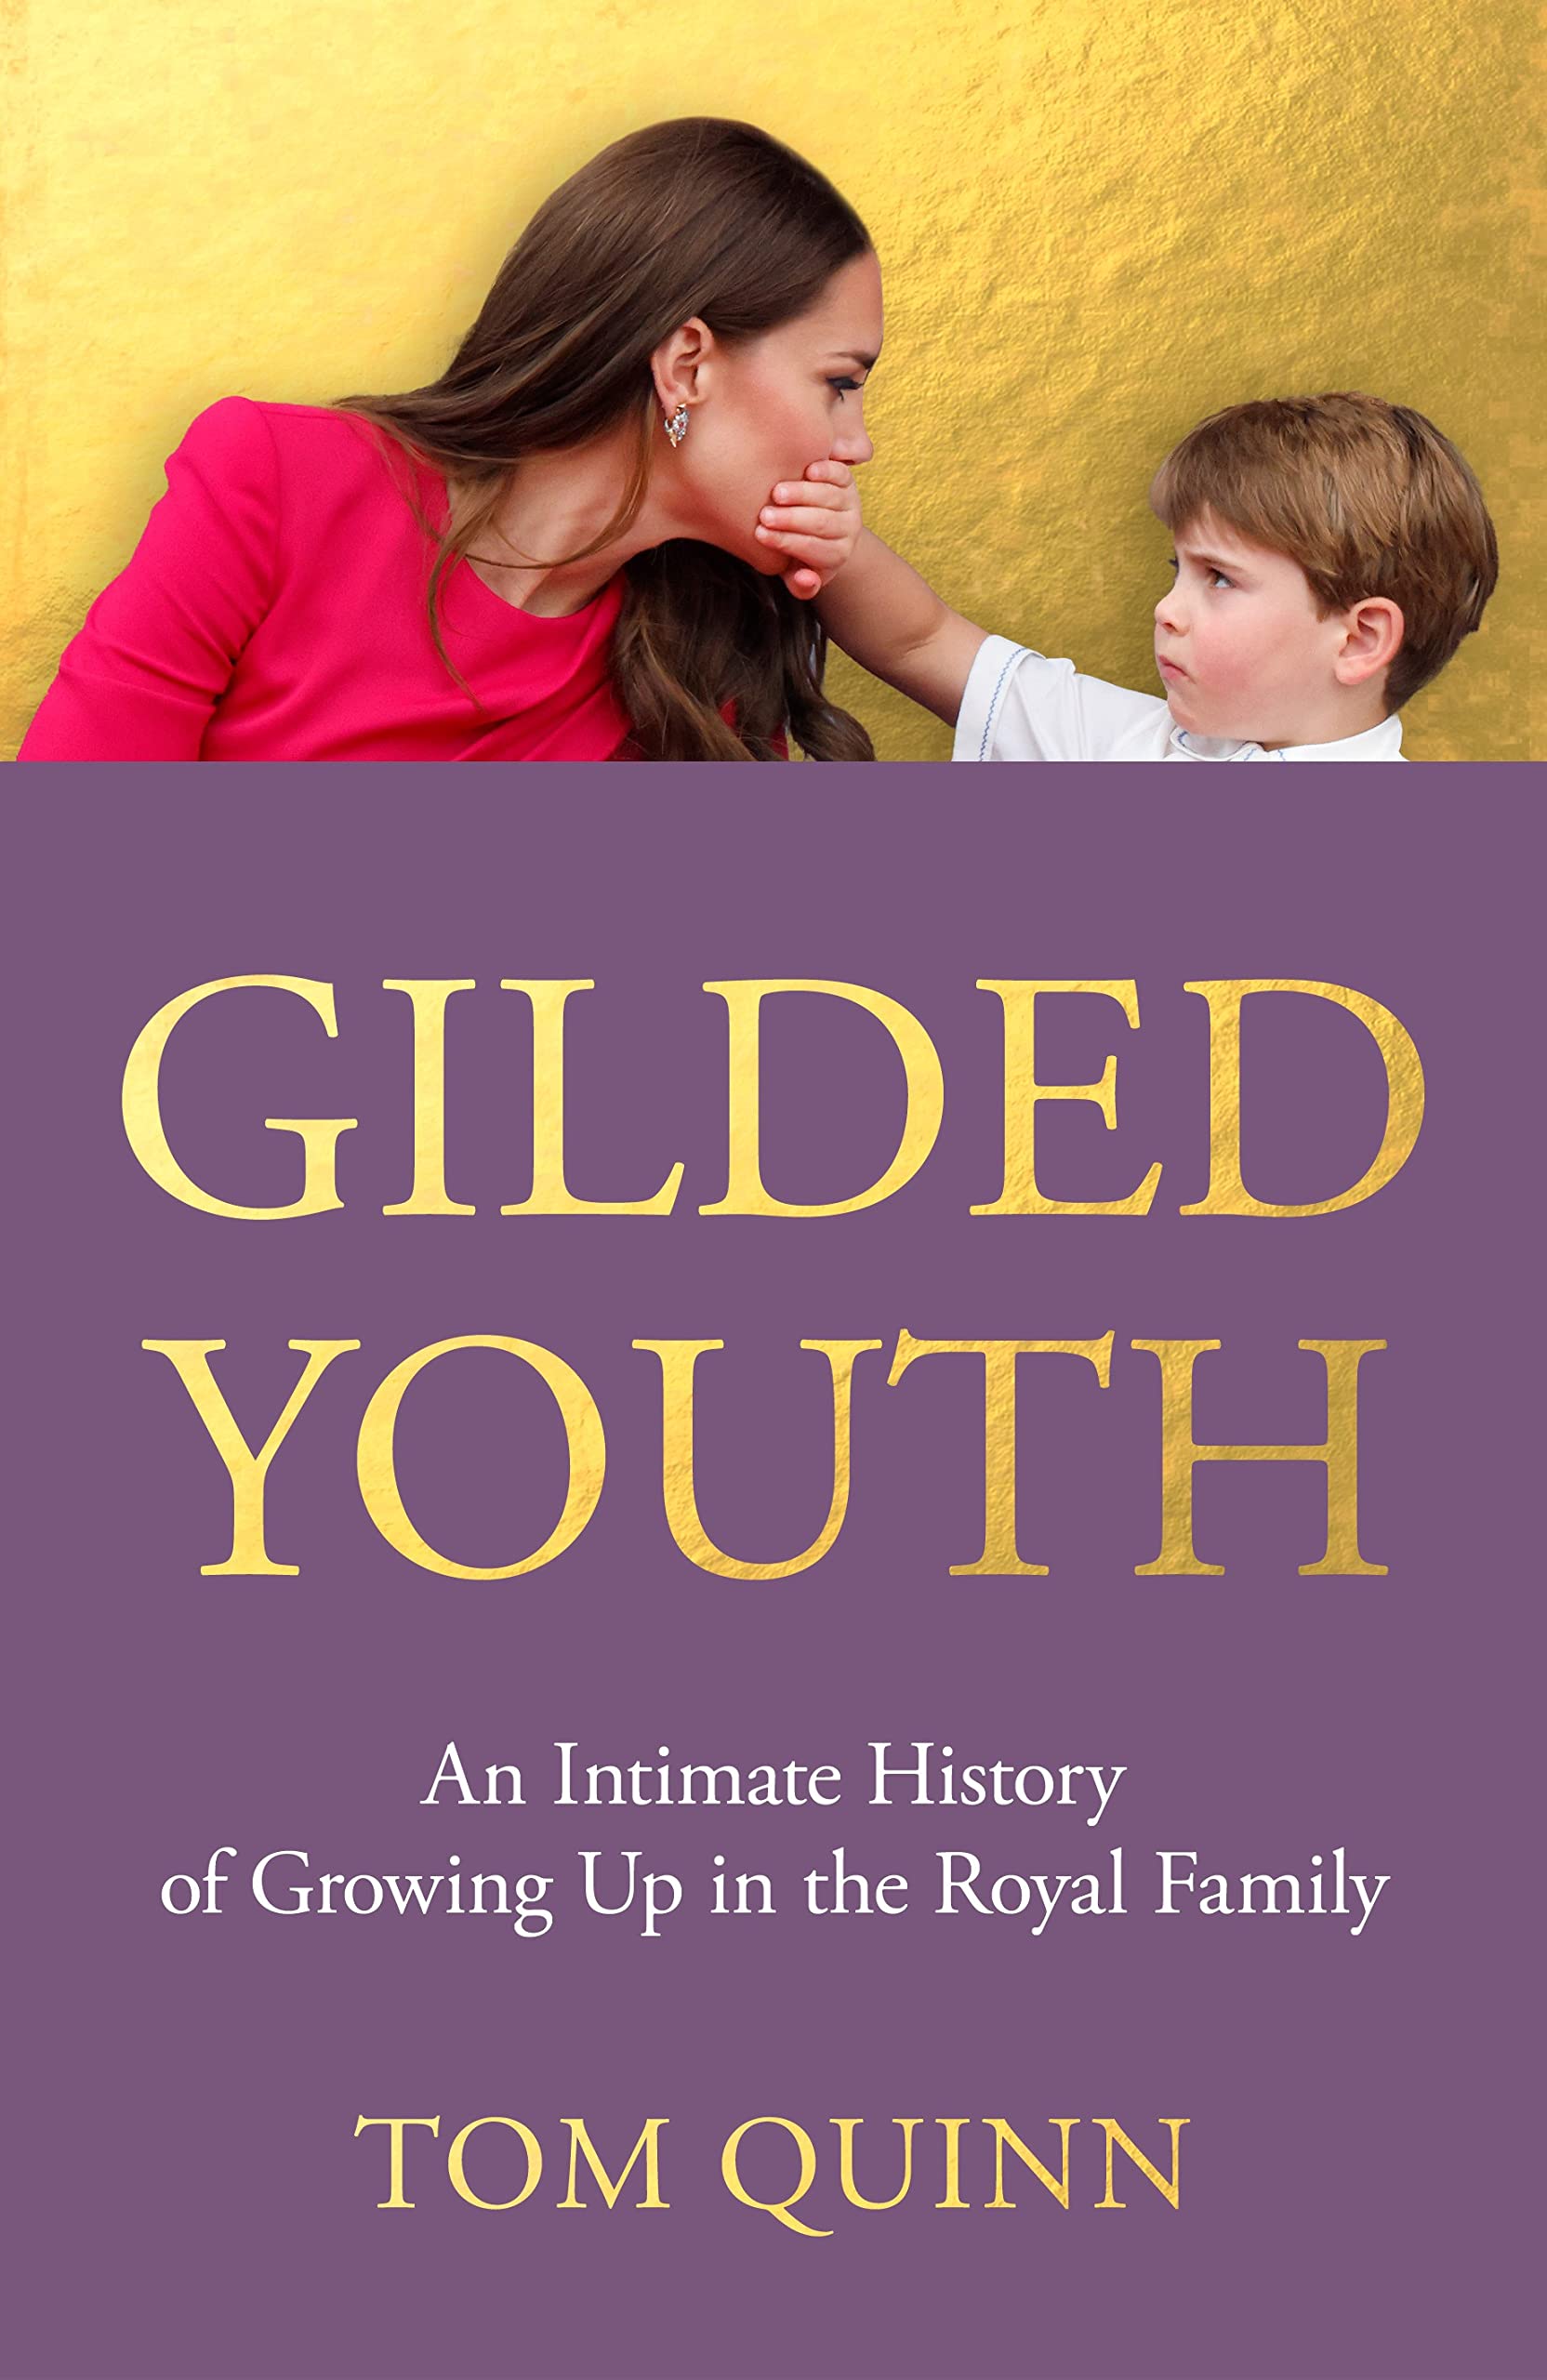 Gilded youth by Tom Quinn hardback book